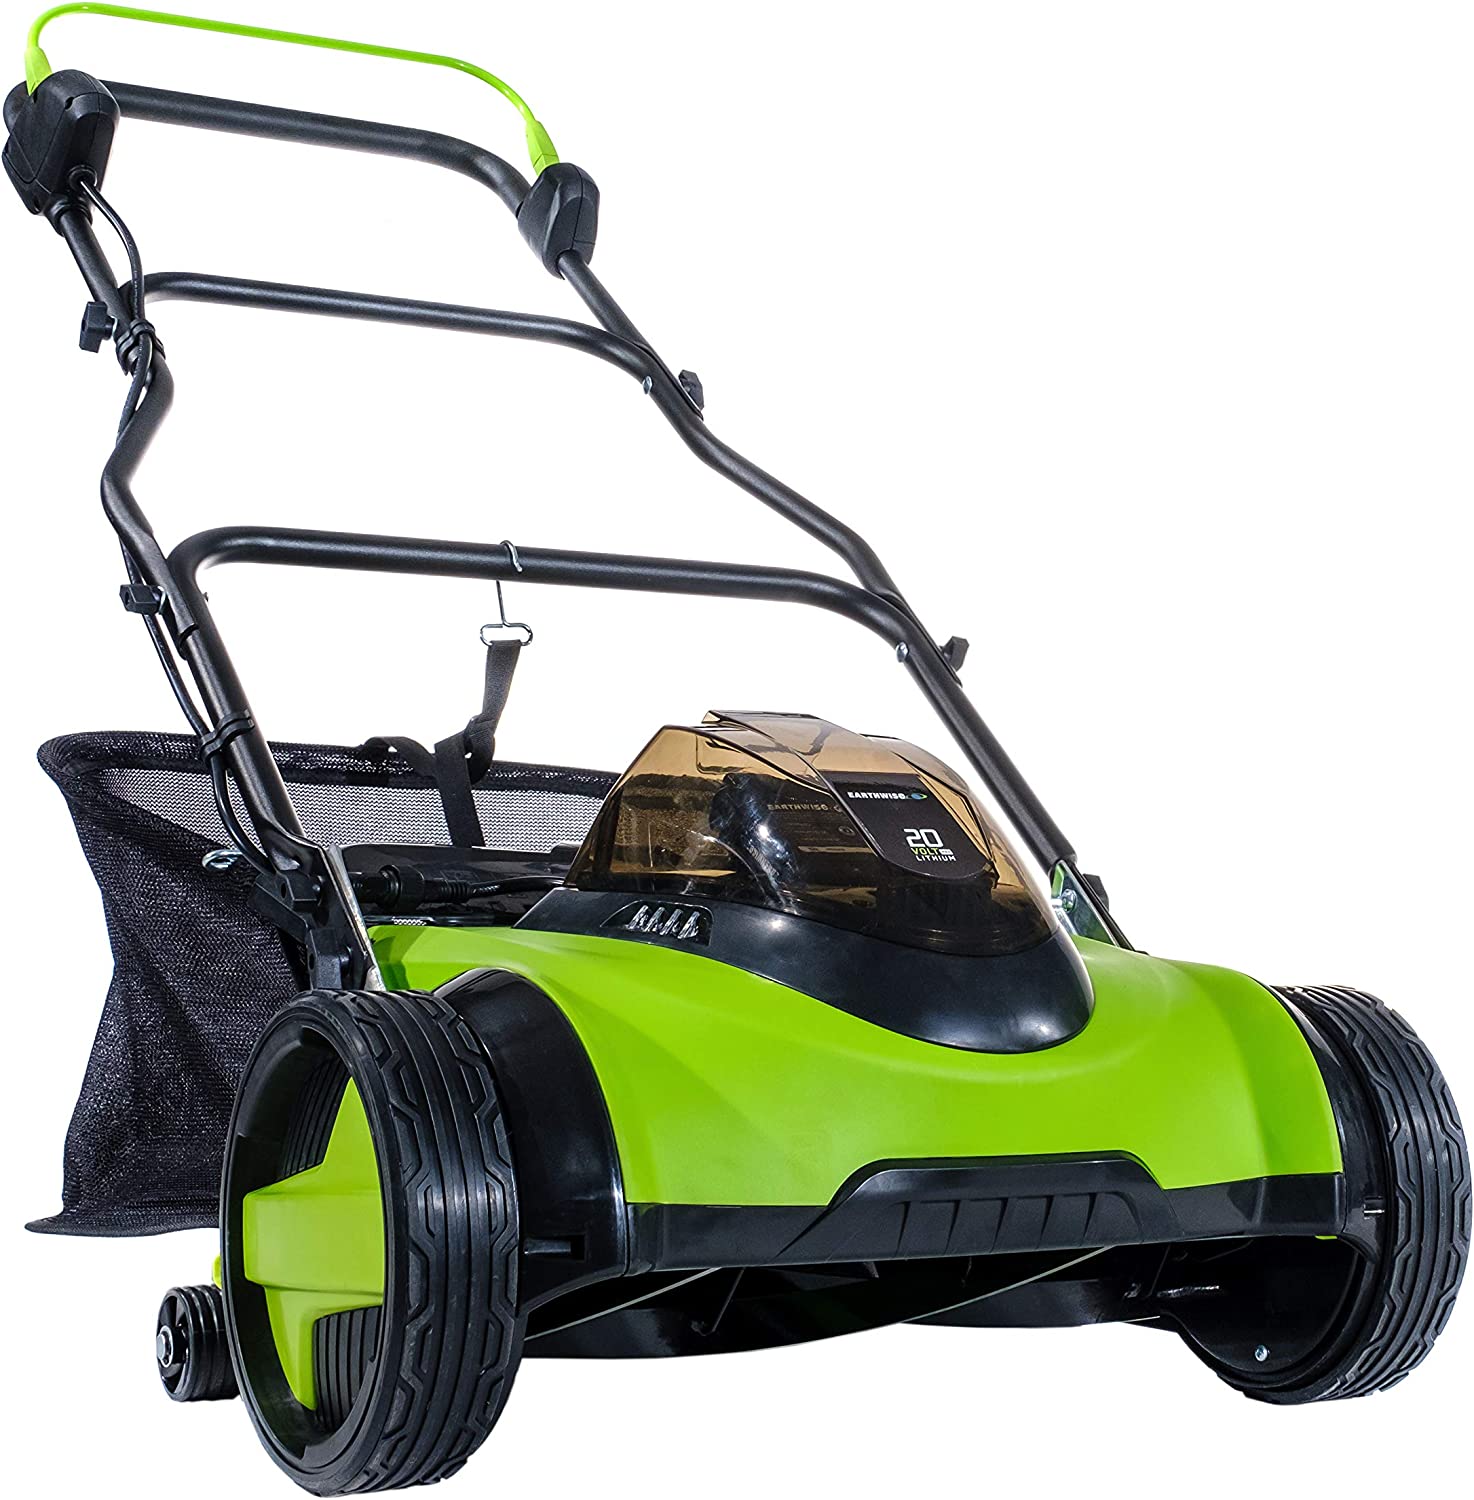 Earthwise Power Tools by ALM 2120-16 20-Volt 16-Inch Electric Cordless –  American Lawn Mower Co. EST 1895